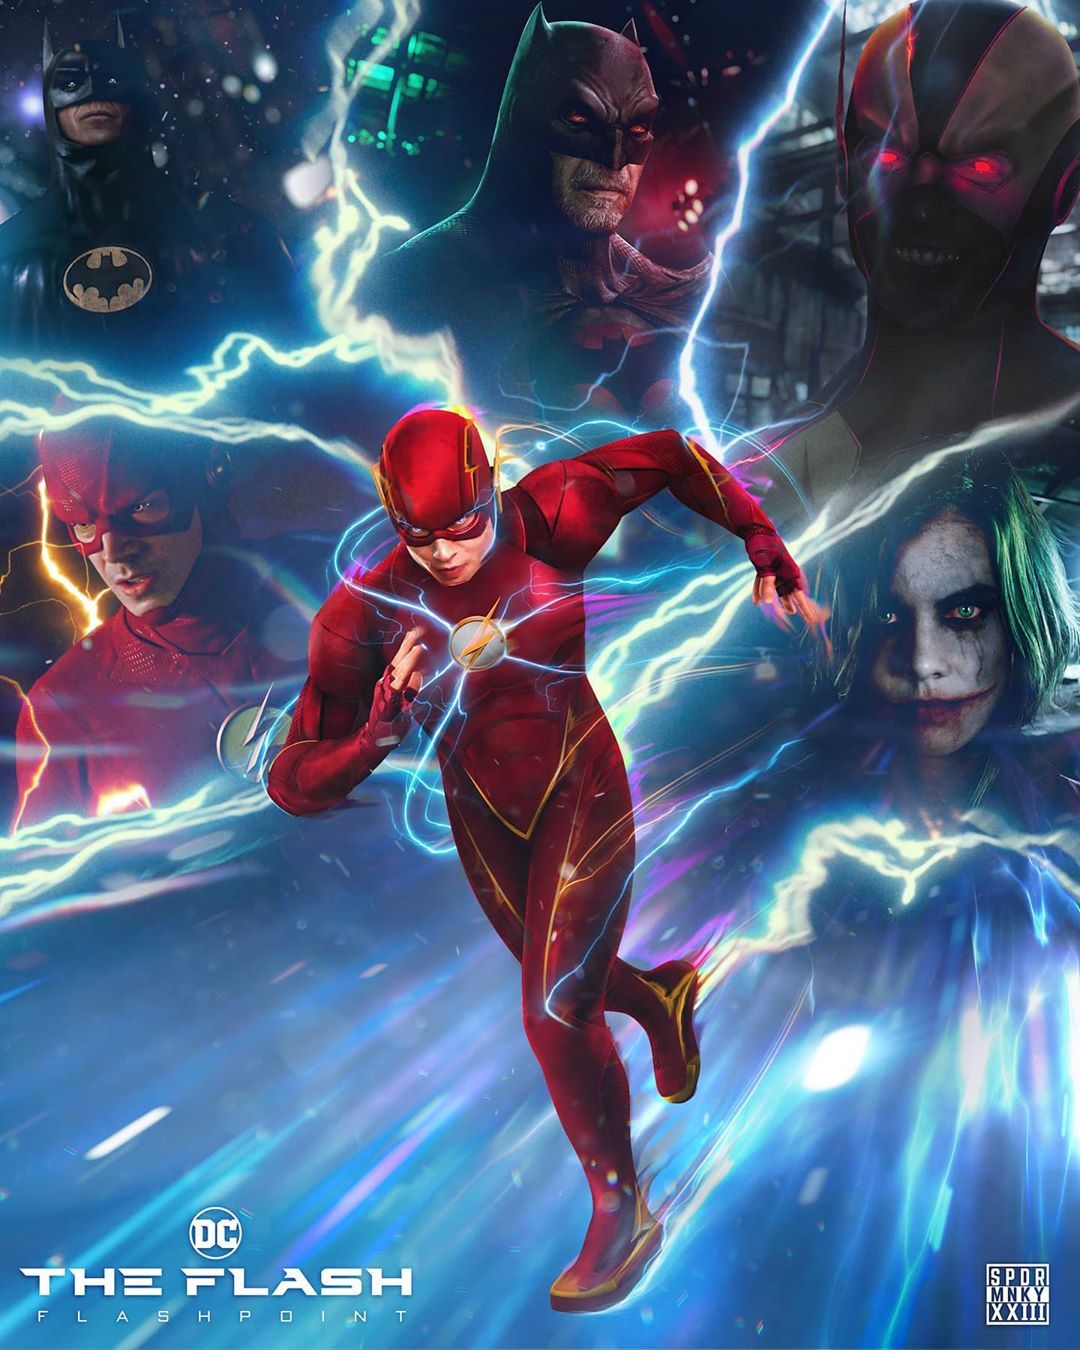 The Flash 2022 Movie Concept Art Wallpapers